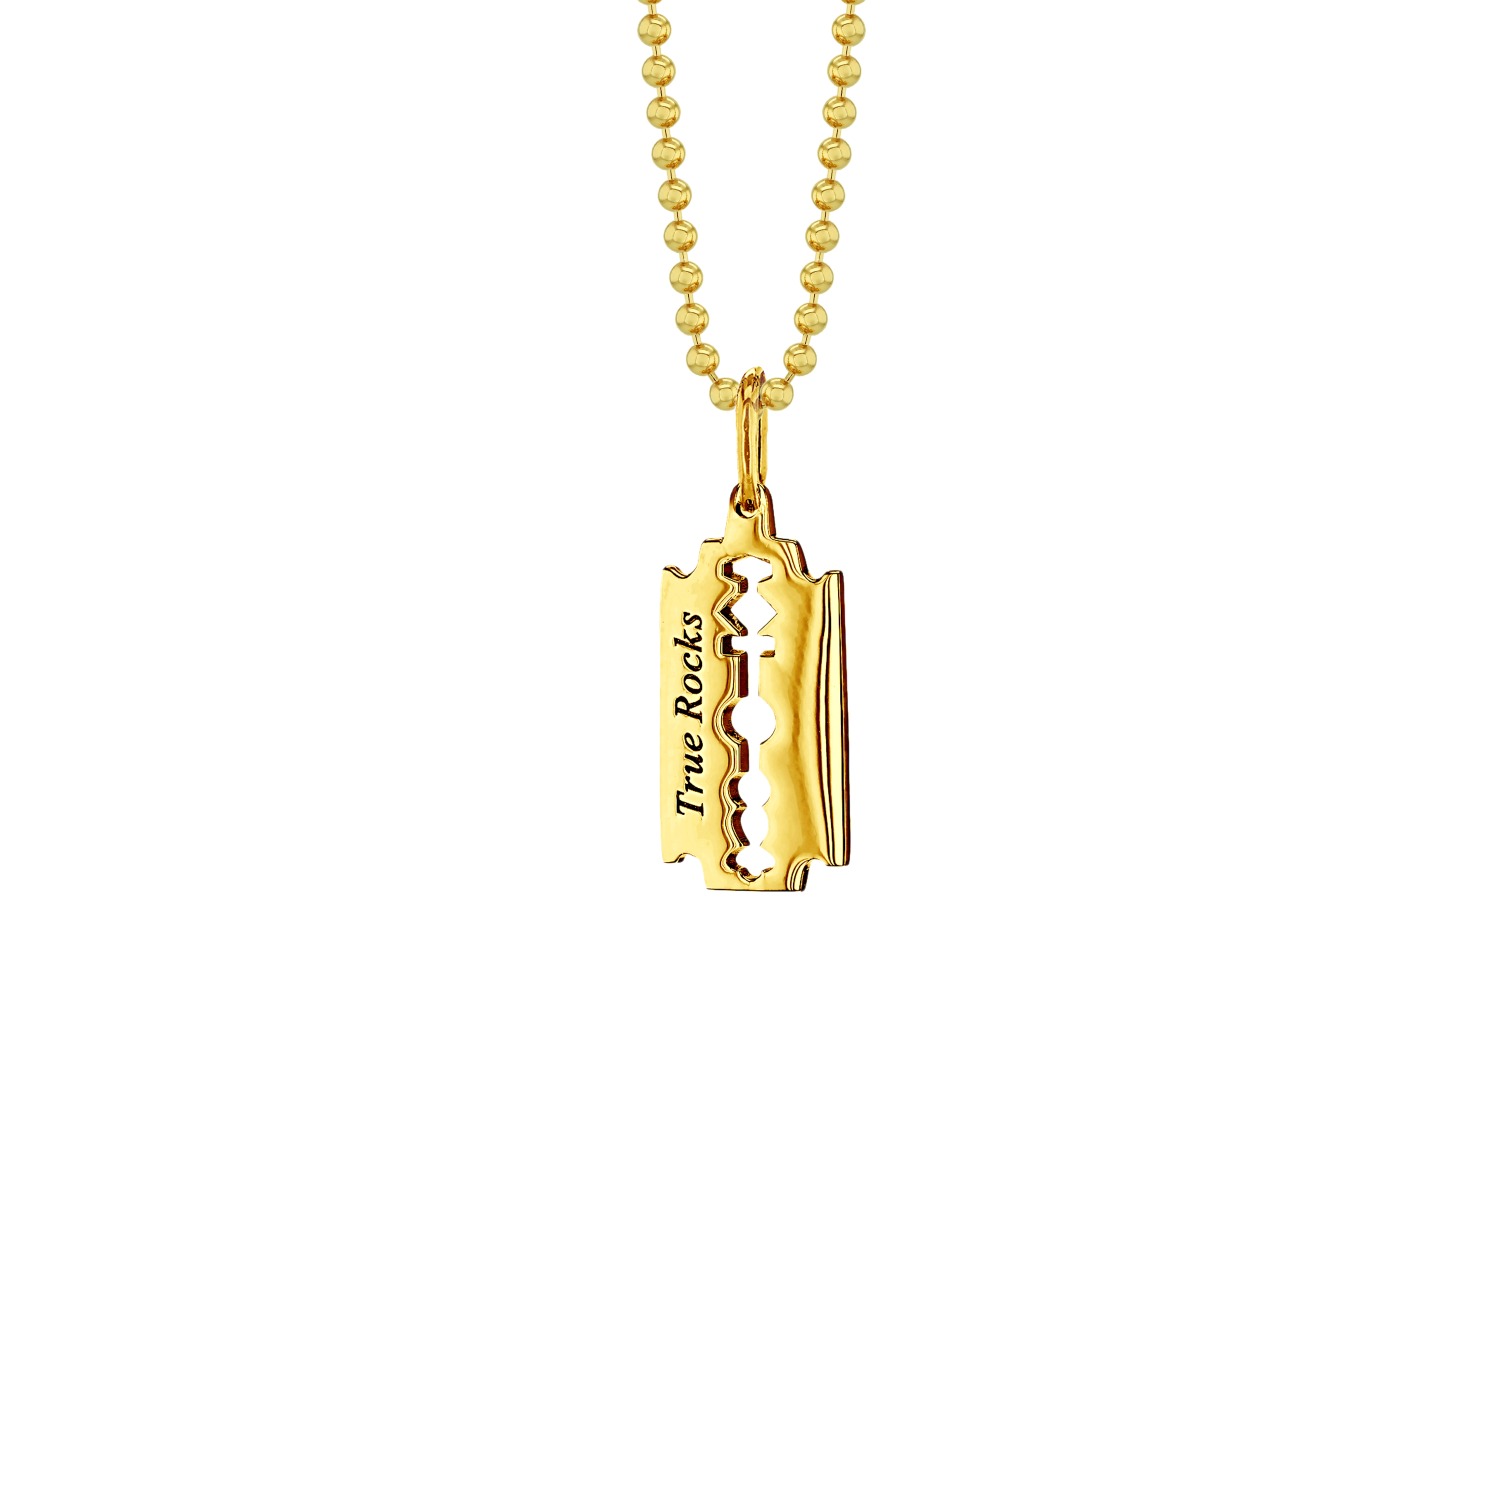 Razor Blade Pendant 18kt Gold Plated on Bead Chain